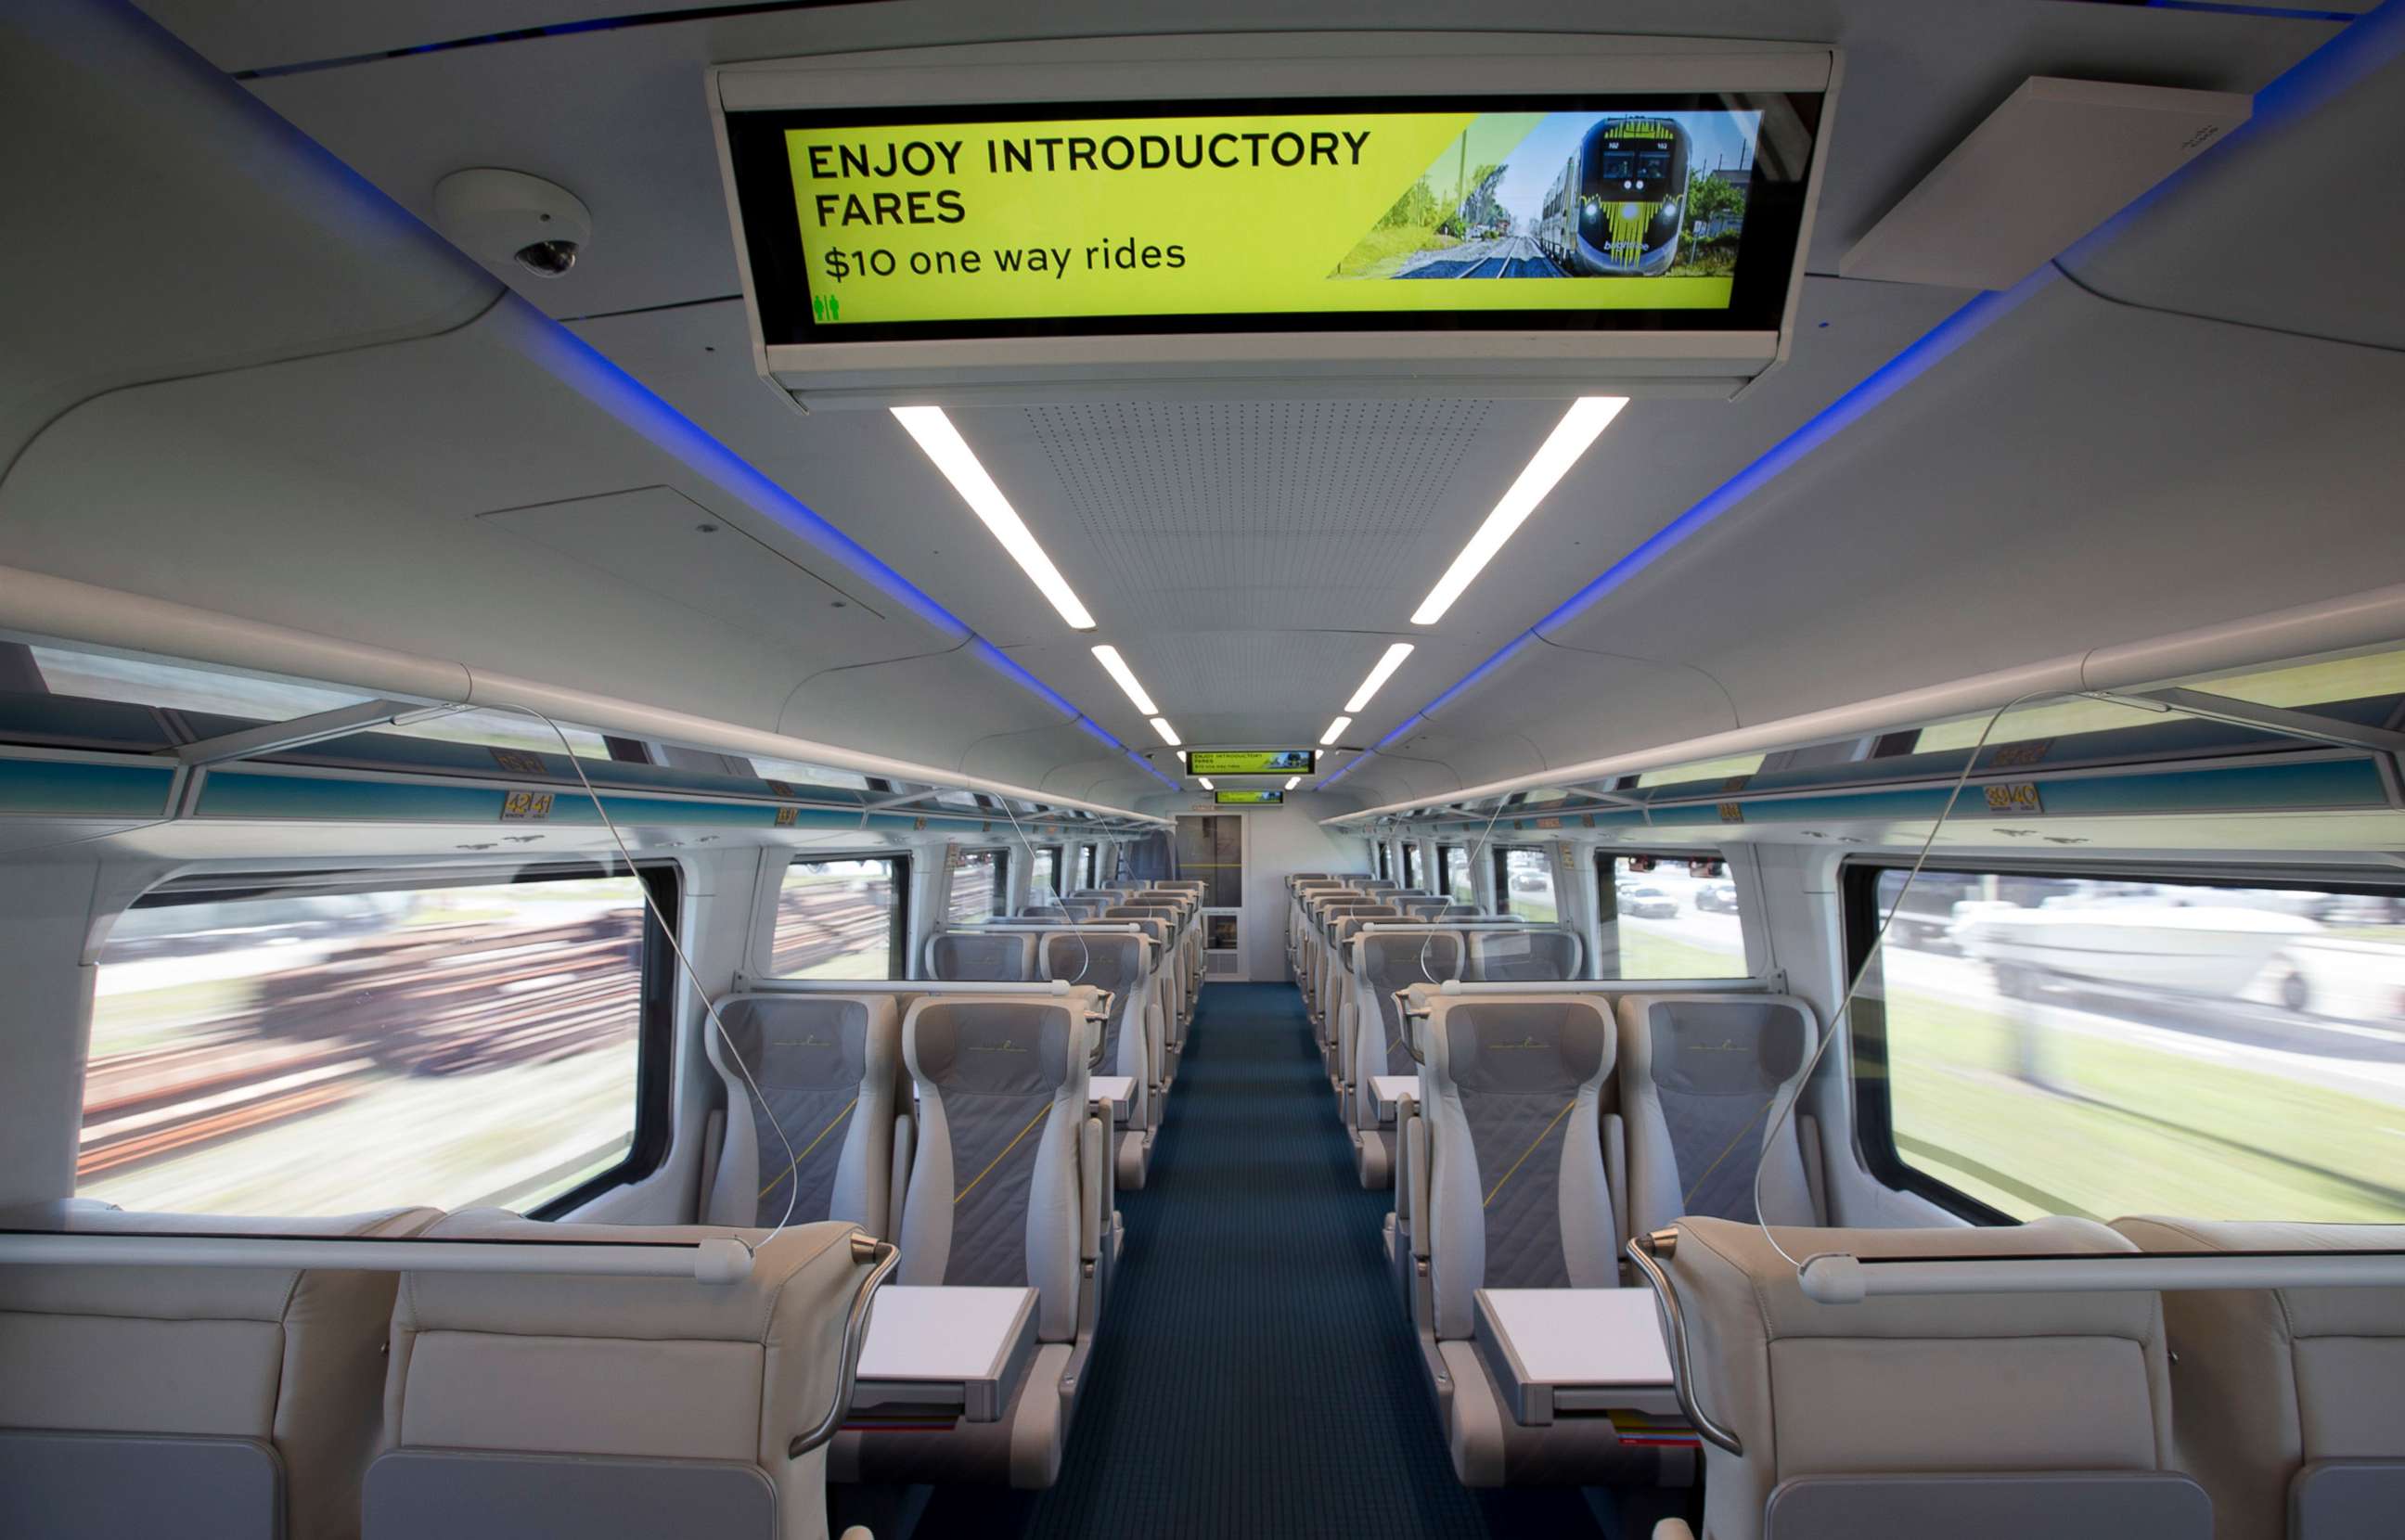 PHOTO: In this Jan 11, 2018, file photo, one of the passenger compartments of a Brightline train is shown as the train heads to Fort Lauderdale, Fla.